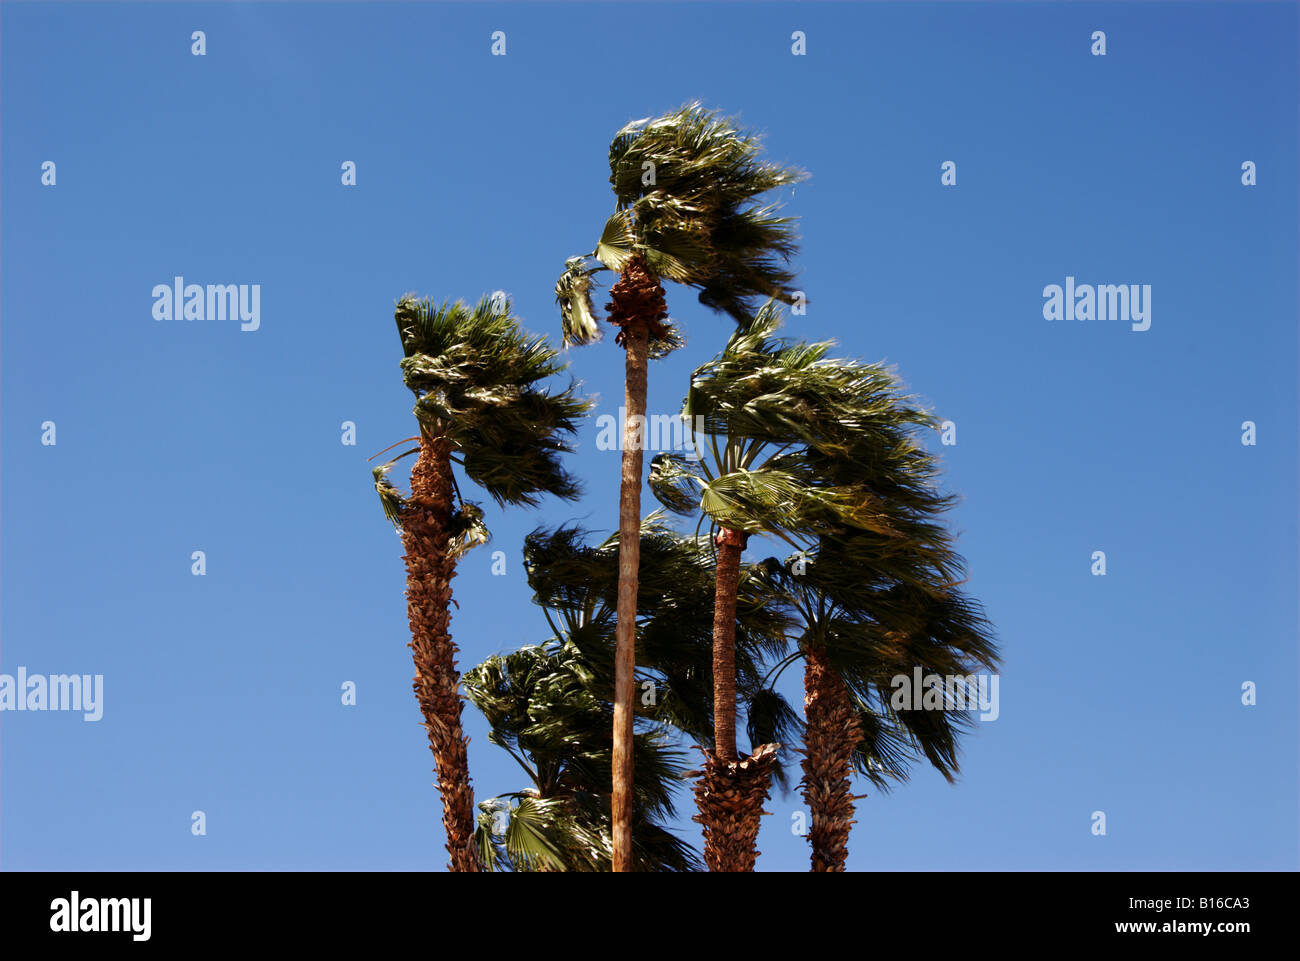 California Fan Palm Trees Blowing in the Wind Stock Photo